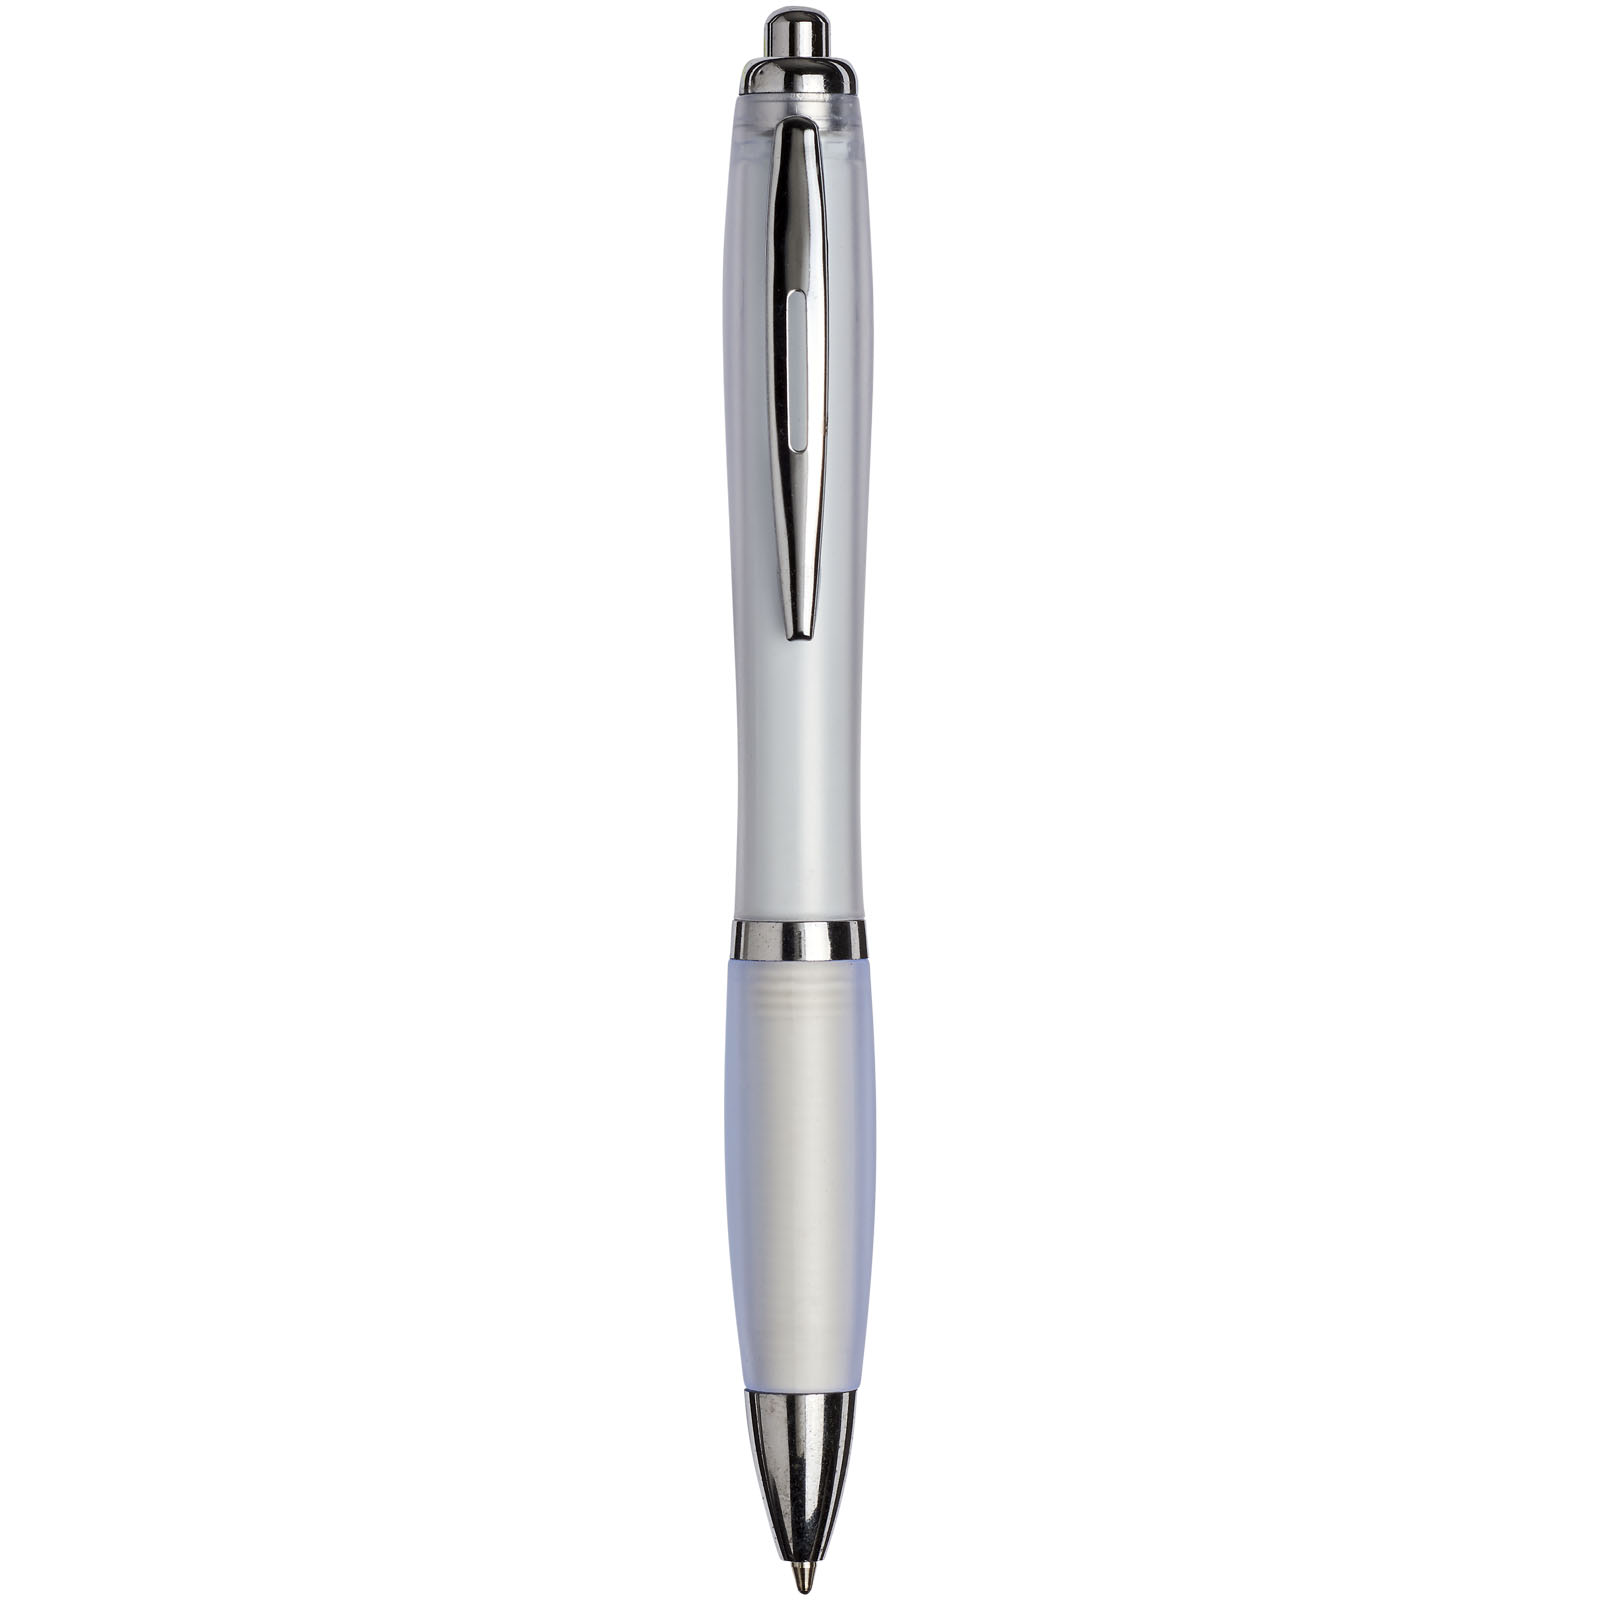 Ballpoint Pens - Curvy ballpoint pen with frosted barrel and grip